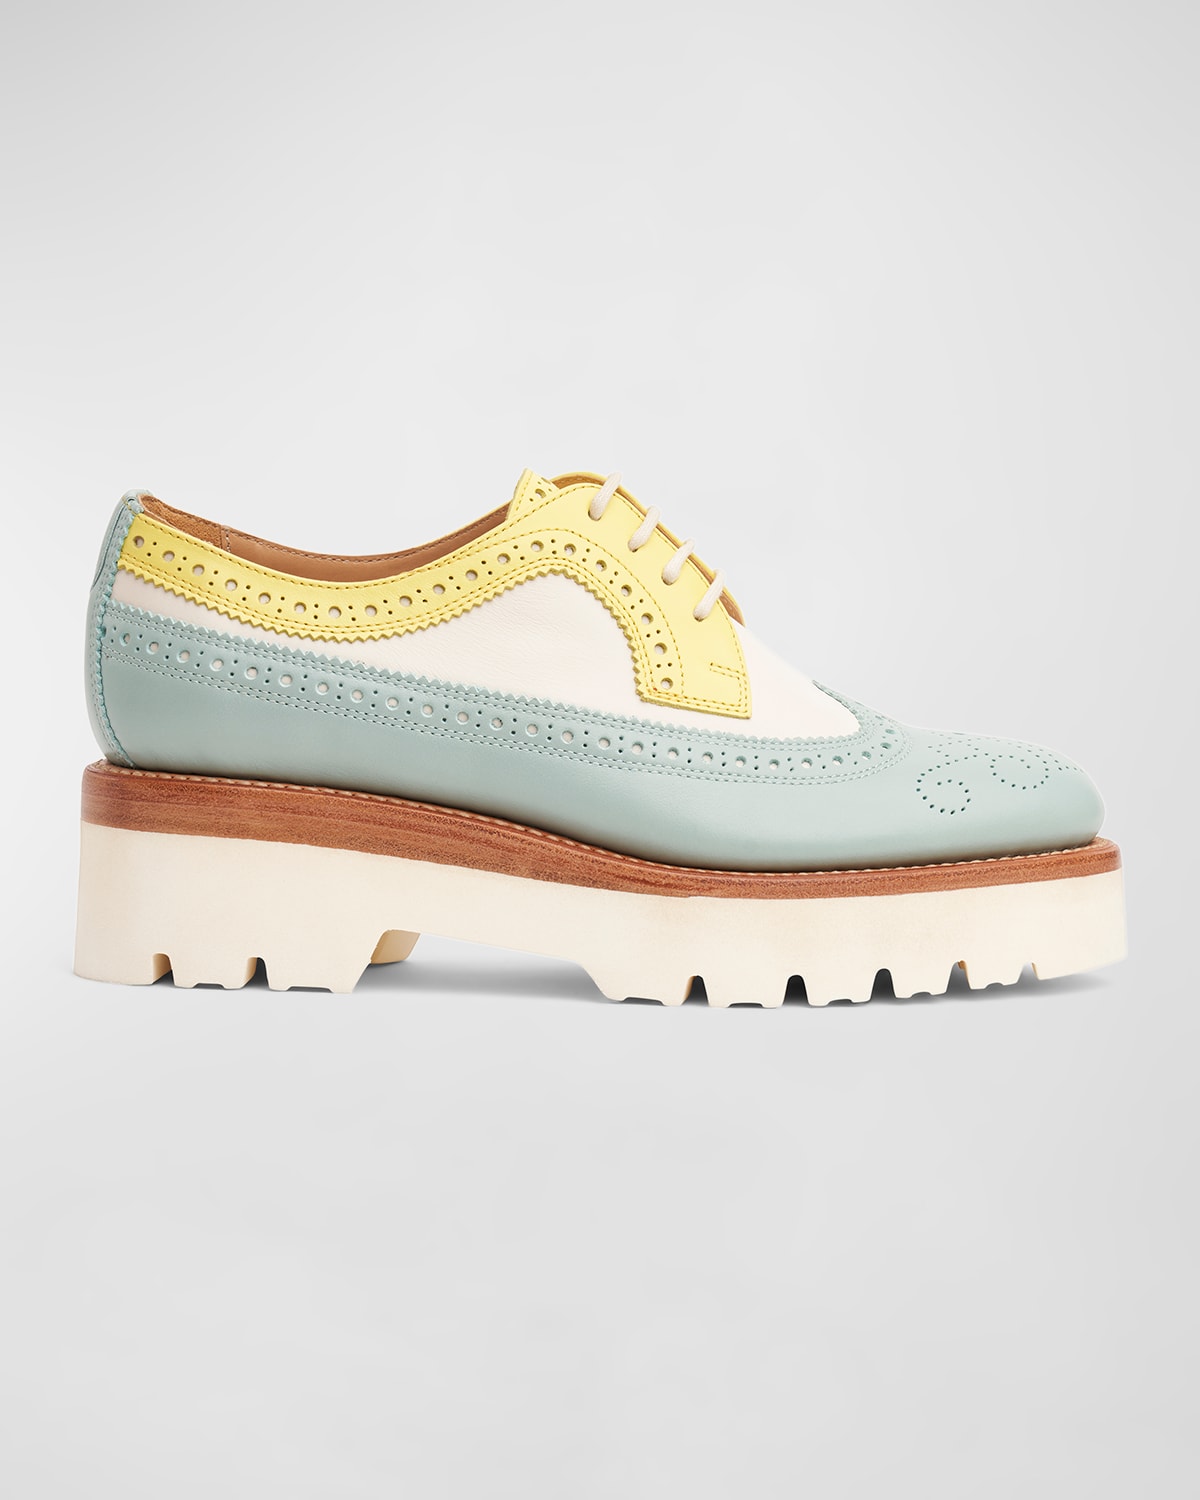 Miss Lucy Multicolored Wing-Tip Platform Loafers